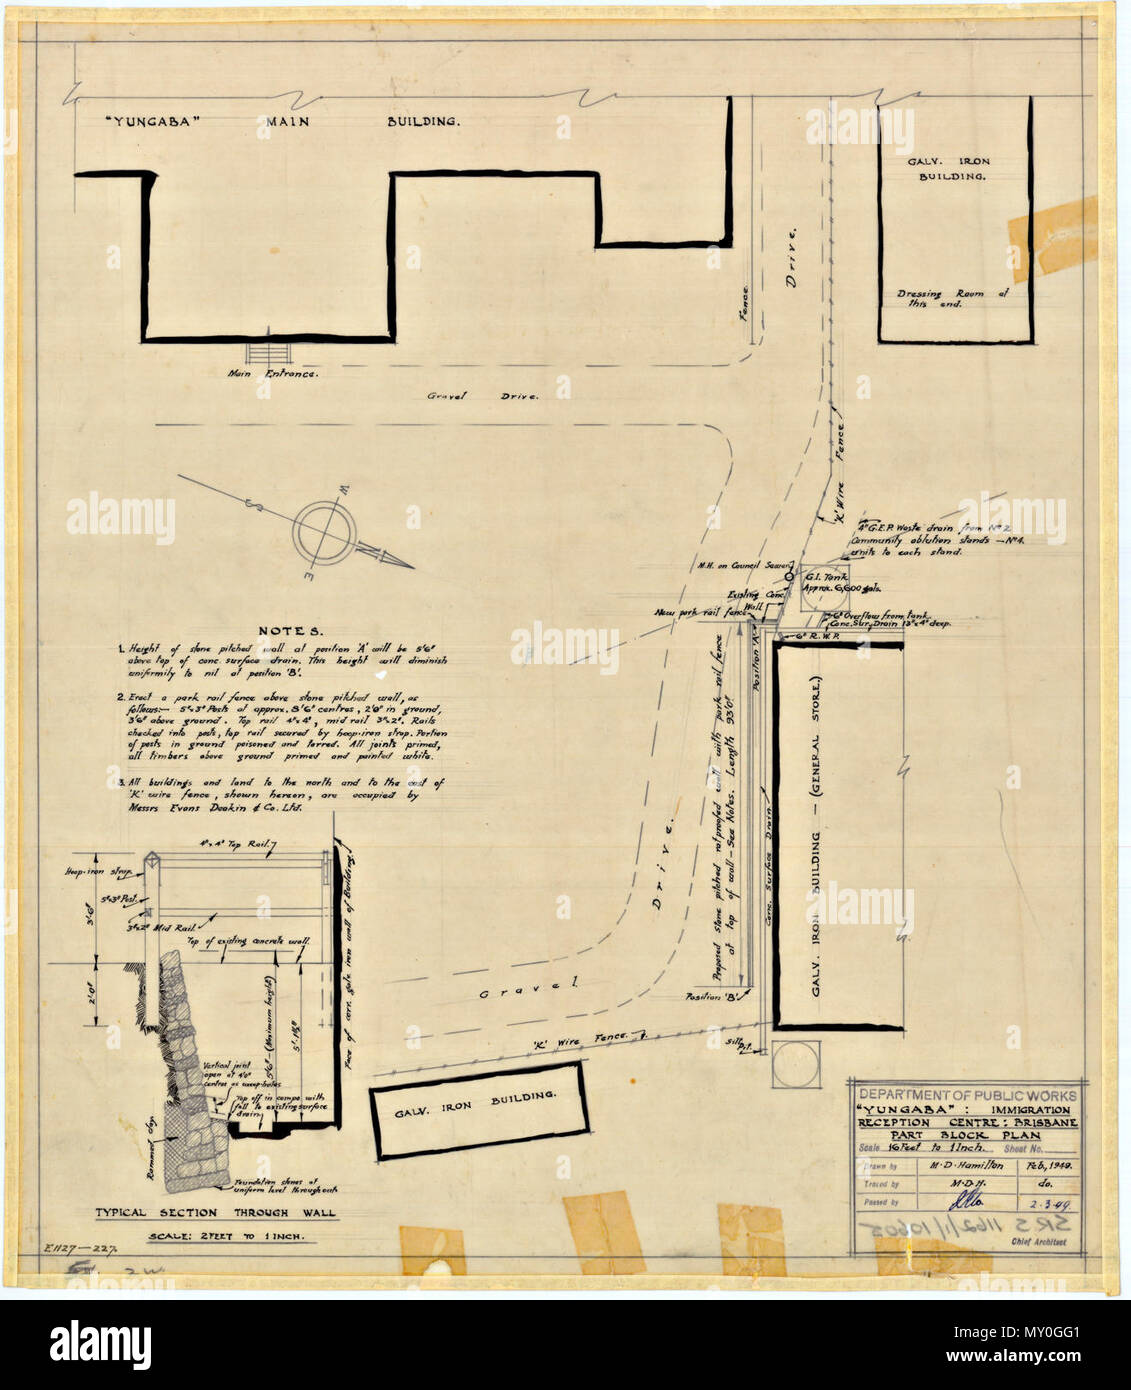 Yungaba Immigration Reception Centre, Brisbane, Part Block Plan, 2 March. From the Queensland Heritage Registerid=600245 ) .  Yungaba is a two-storey brick institutional building designed as an immigrant depot in 1885 by John James Clark, colonial architect for Queensland. Following his dismissal shortly after, the plan was developed by Edward Henry Alder and Robert Henry Mills. Constructed by William Peter Clark, the building is described as being of Italianate/Queensland/ Institutional style.  Following the subdivision of Kangaroo Point in 1843-44, lots 21 and 22 were purchased by Judah and  Stock Photo